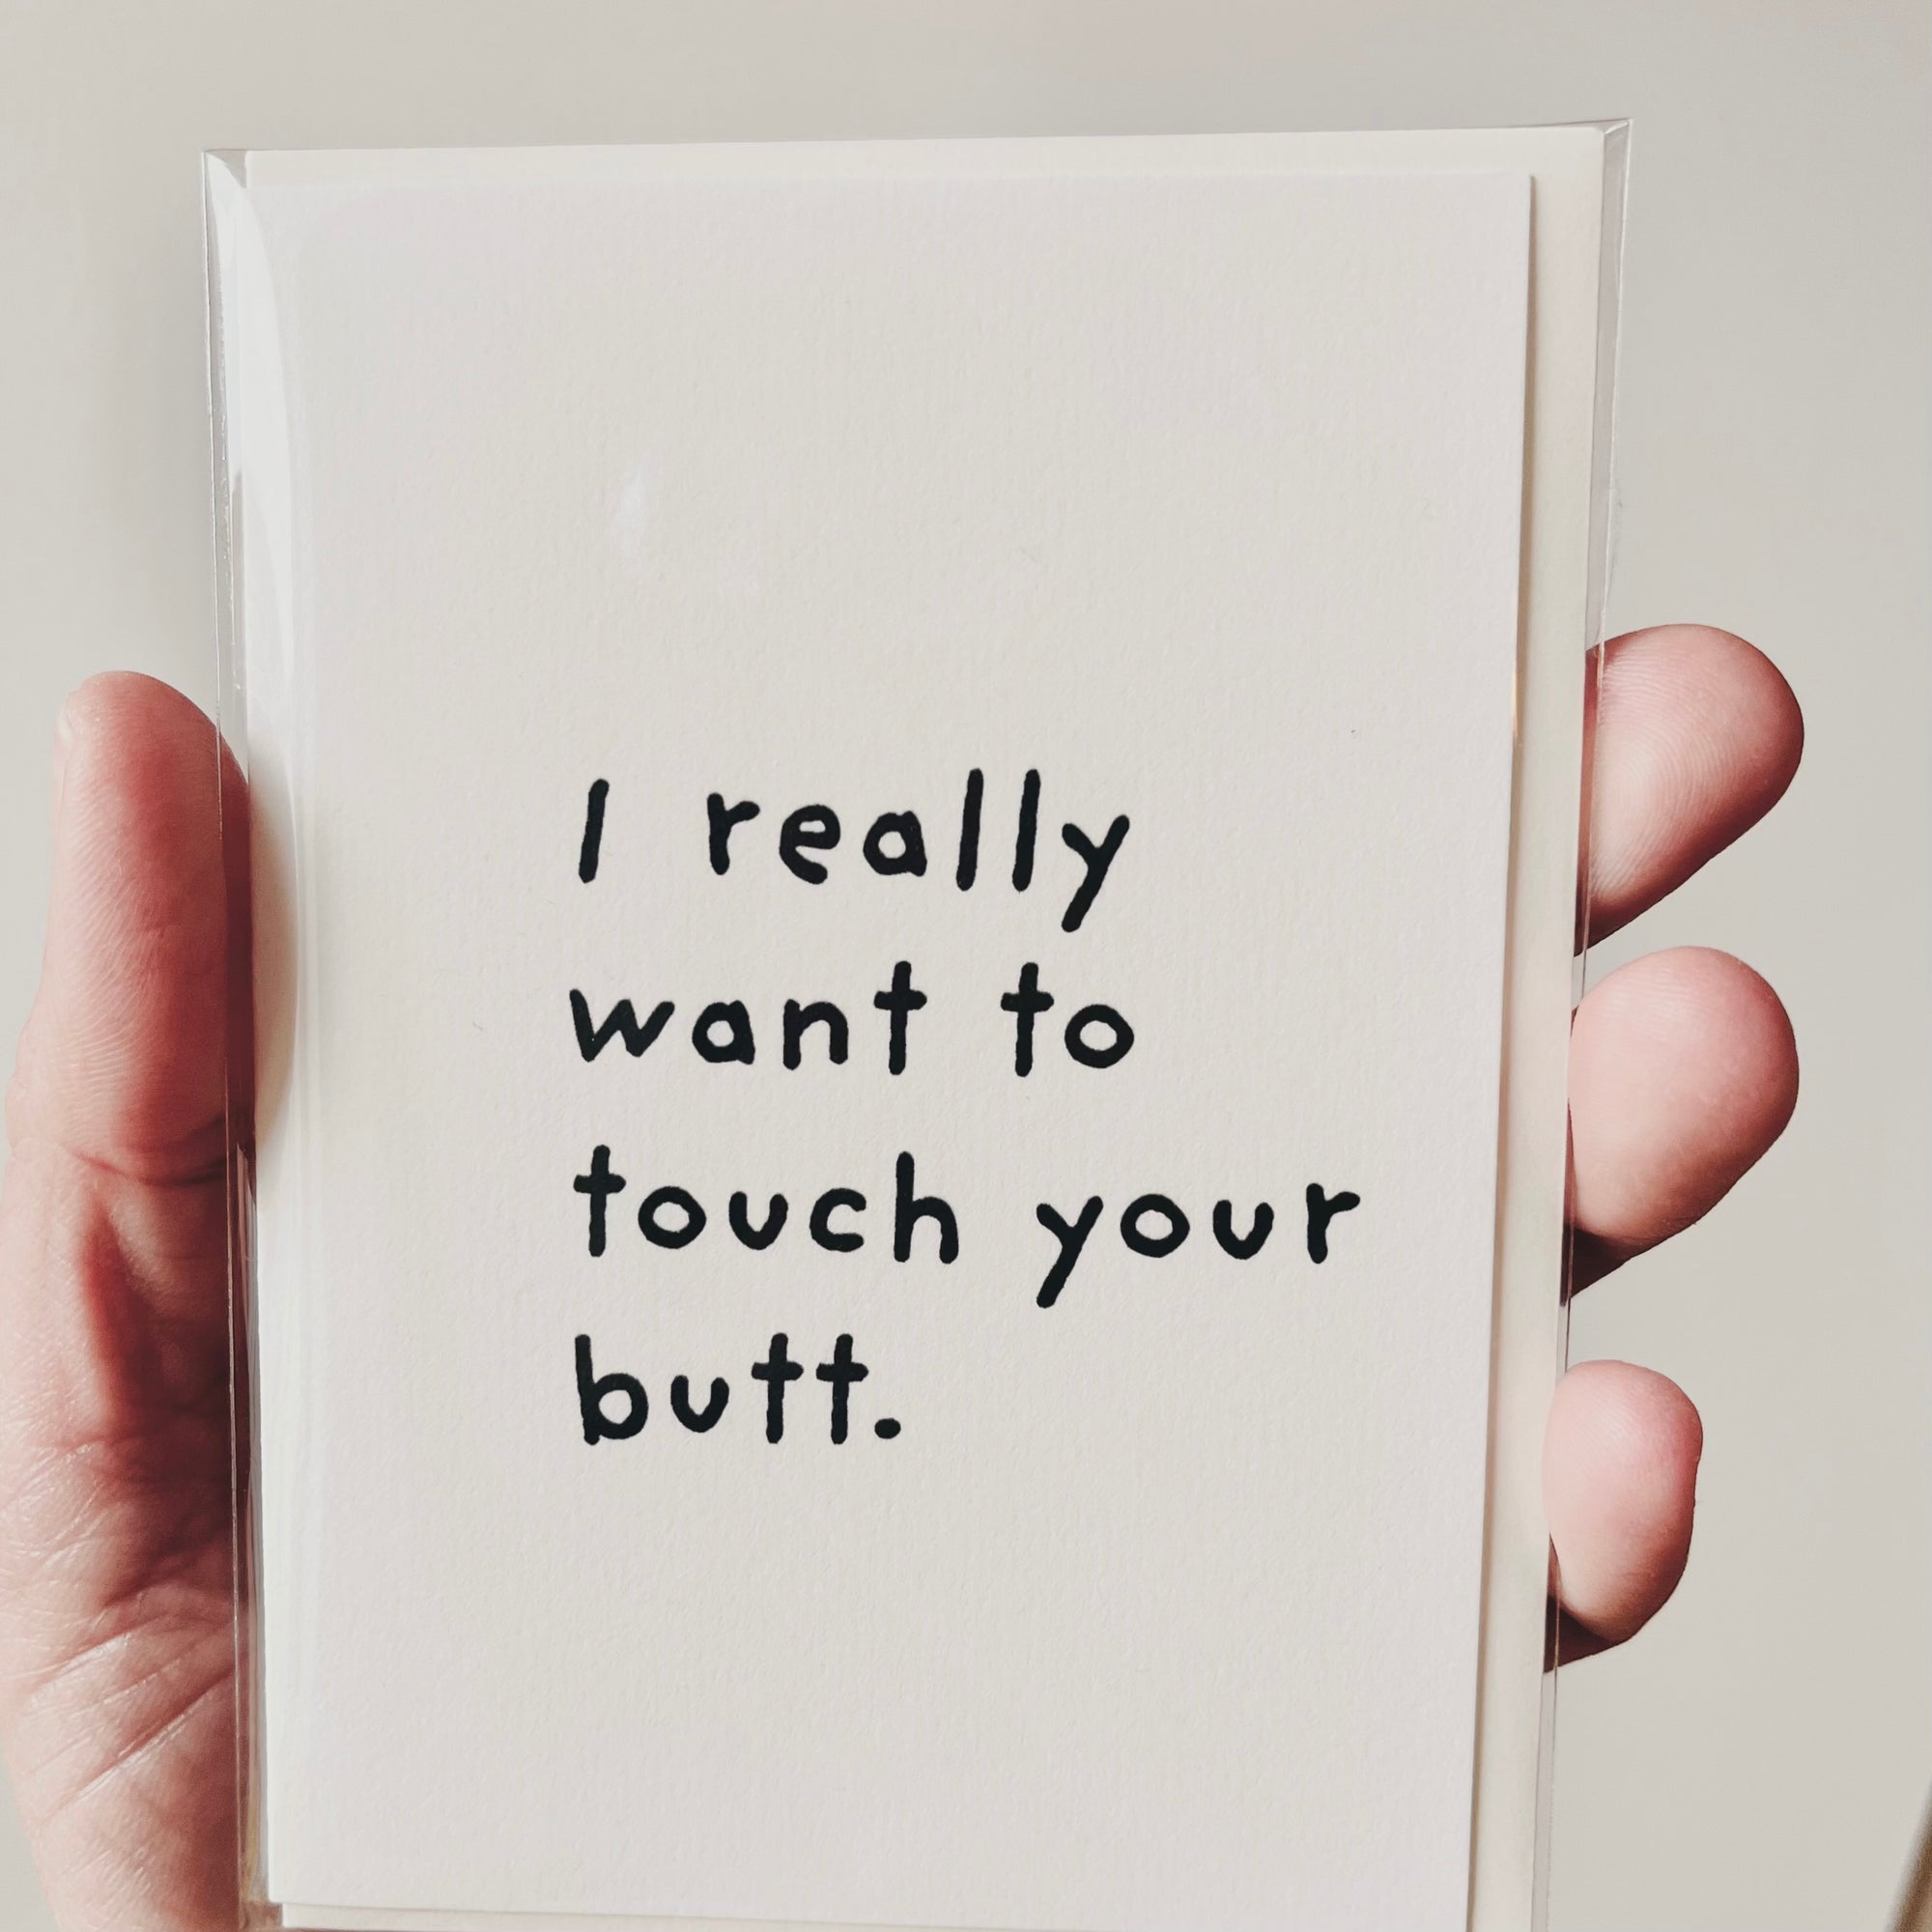 I really want to touch your butt.